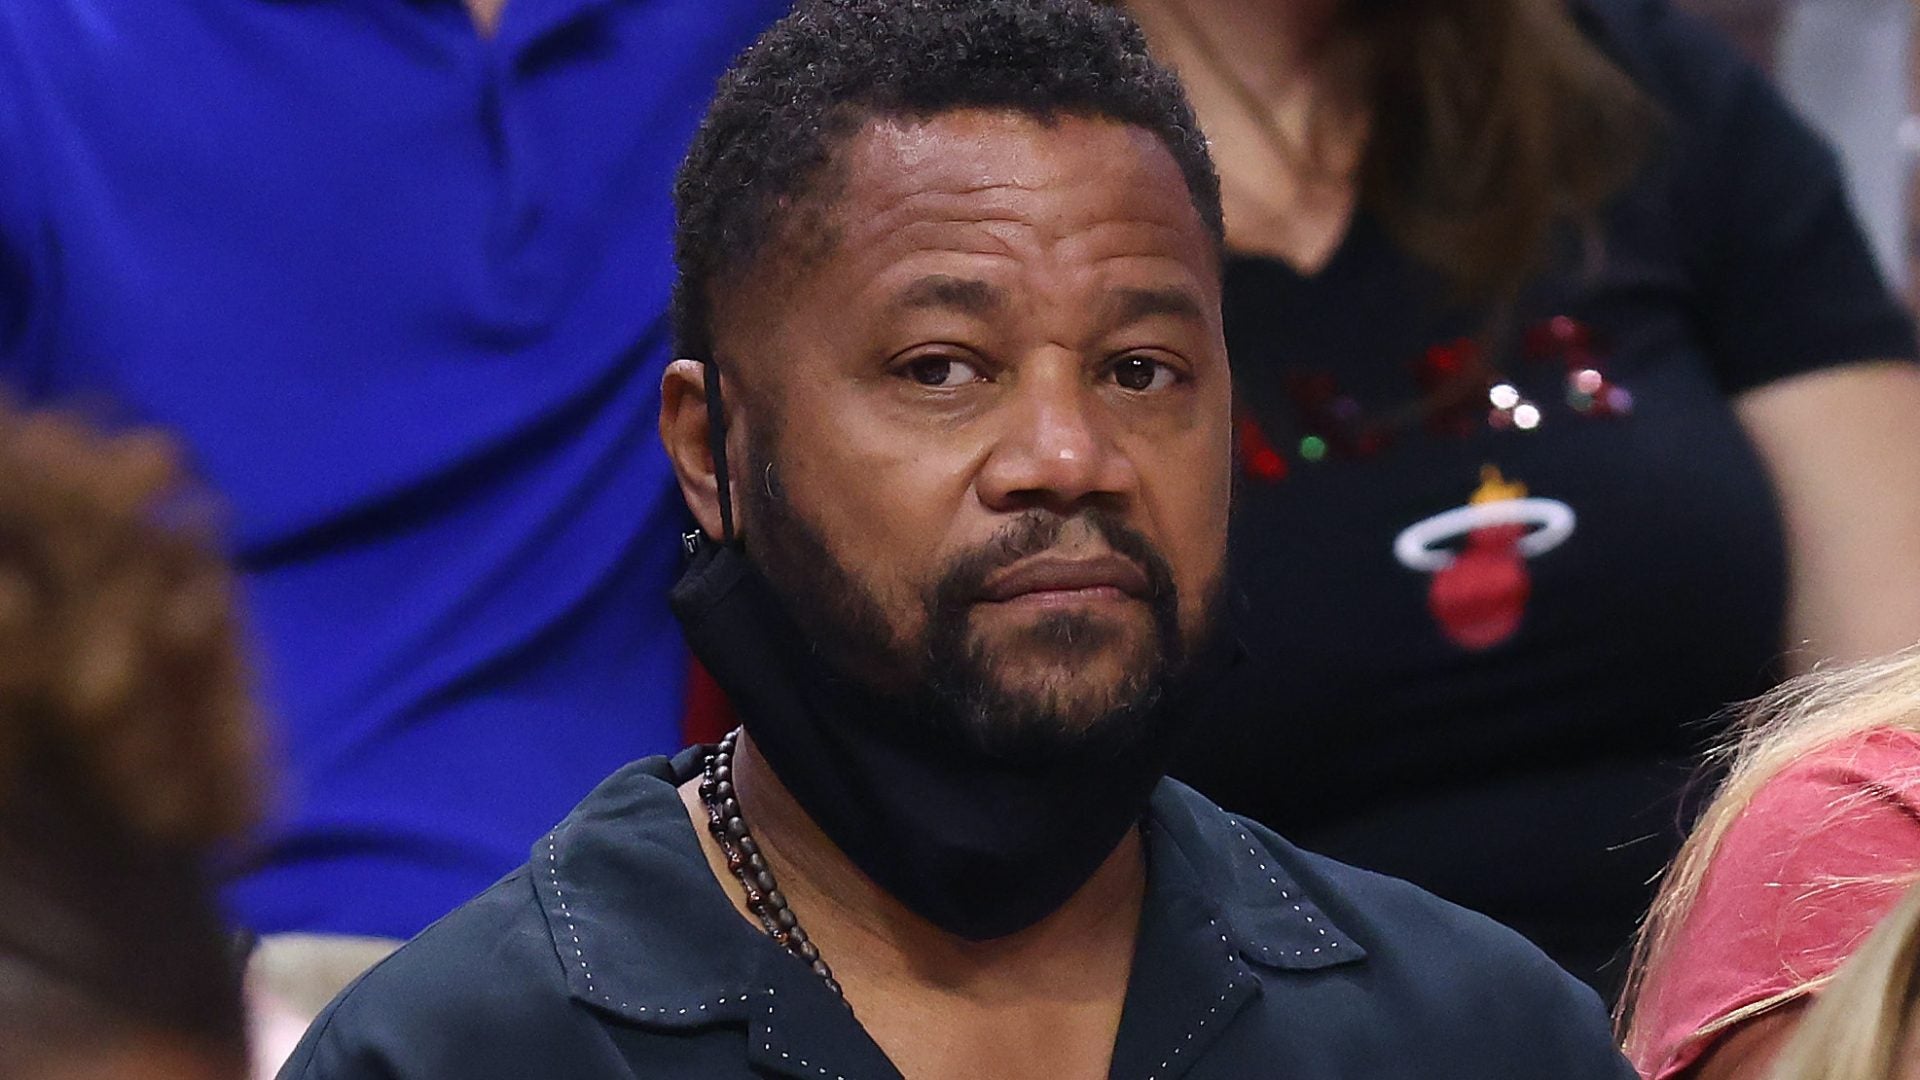 Cuba Gooding, Jr. Pleads Guilty To Sexual Misconduct Charge